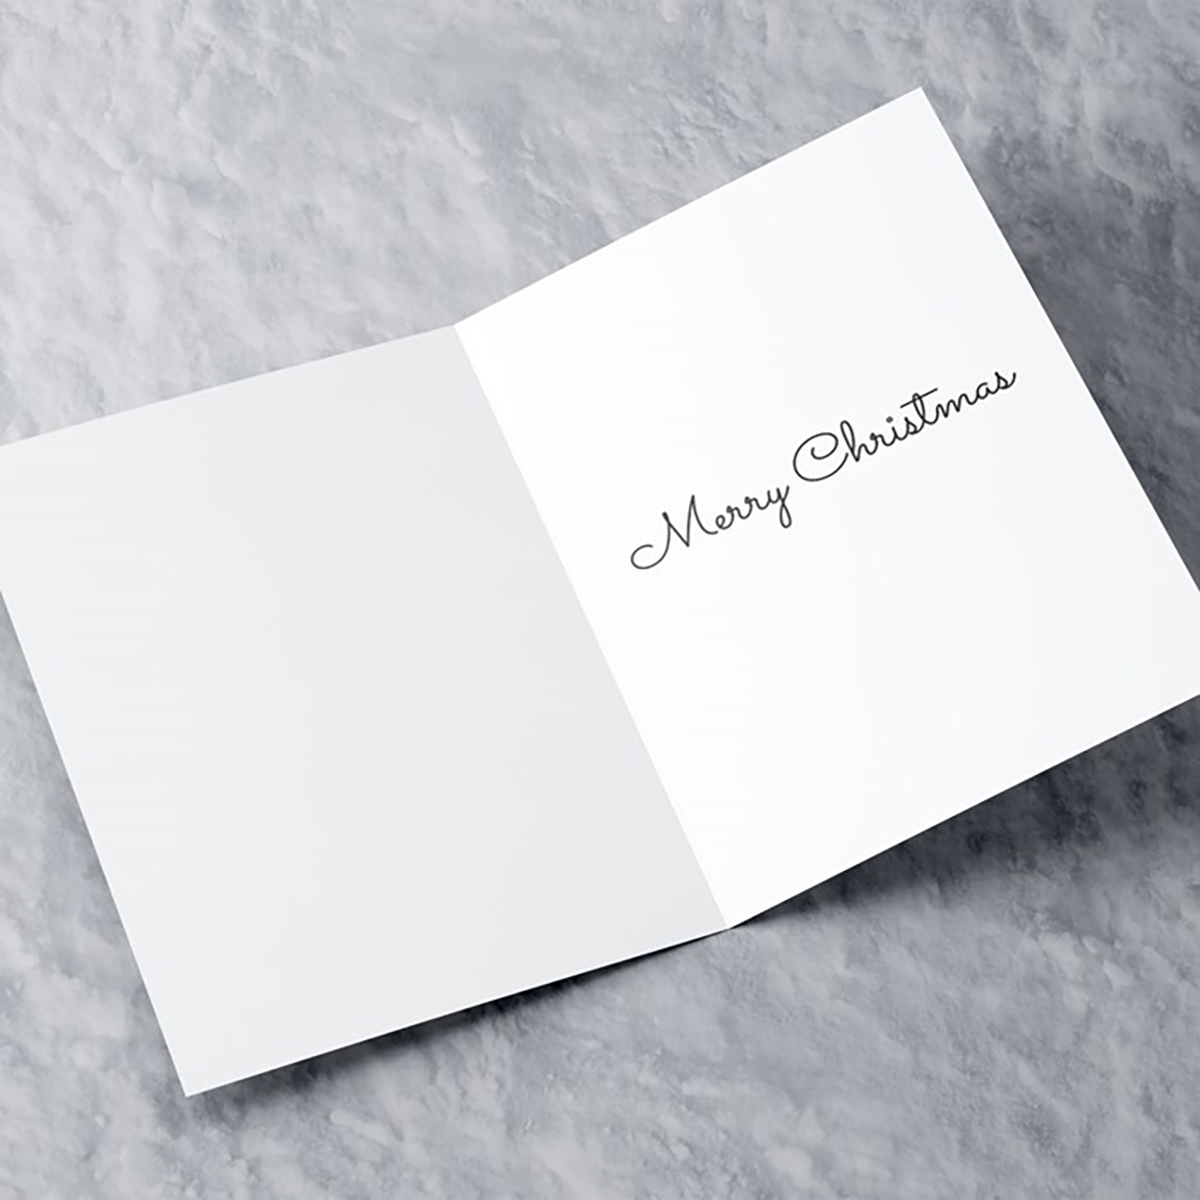 Personalised Christmas Card - Penguin Couple Wife